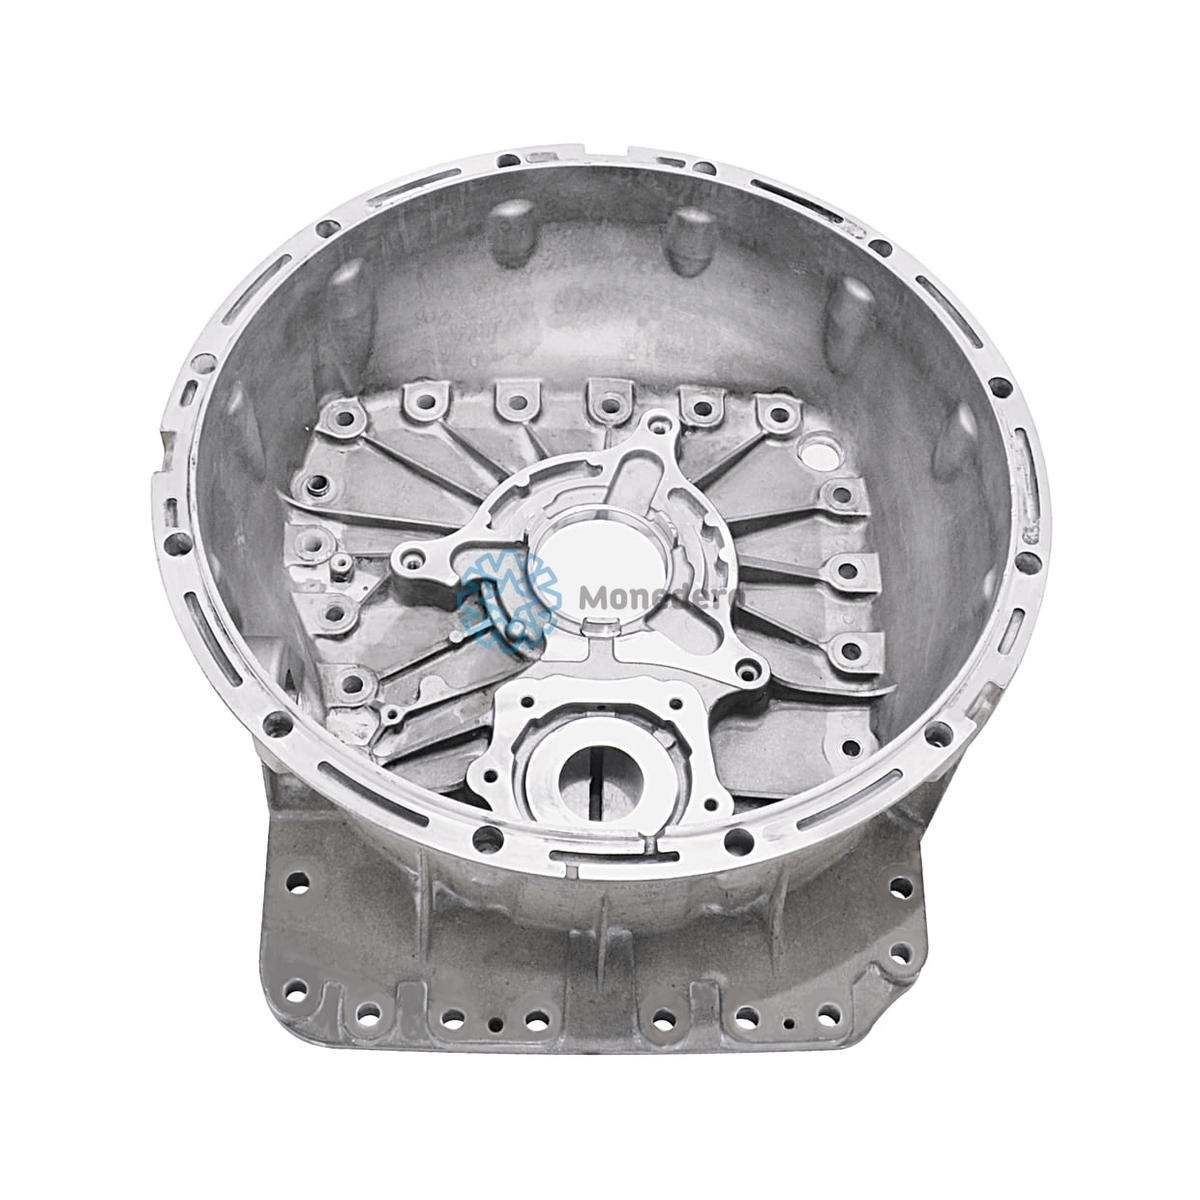 Original 50020000003 MONEDERO Flange lid, manual transmission experience and price